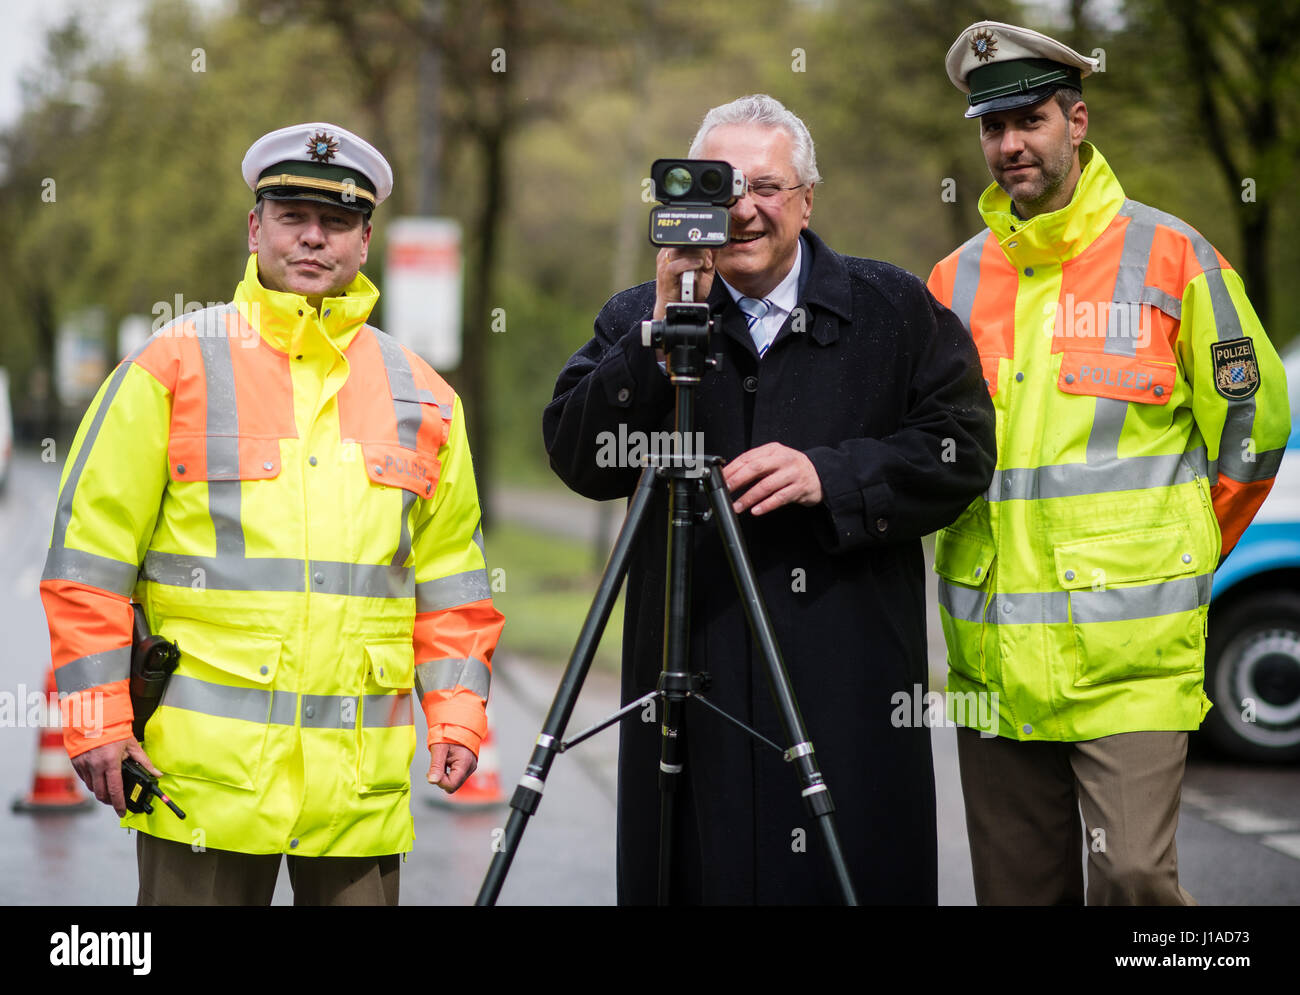 Munich, Germany. 19th Apr, 2017. Bavaria's Interior Minister Joachim Herrmann takes a look through a laser gun for measuring speed, flanked by Chief of Police Tobias Flamme and Police Chief Advisor Peter Schiller, in Munich, Germany, 19 April 2017. Police in several german states are enforcing stricter speed controls as part of a continent-wide speed control marathon. Photo: Matthias Balk/dpa/Alamy Live News Stock Photo